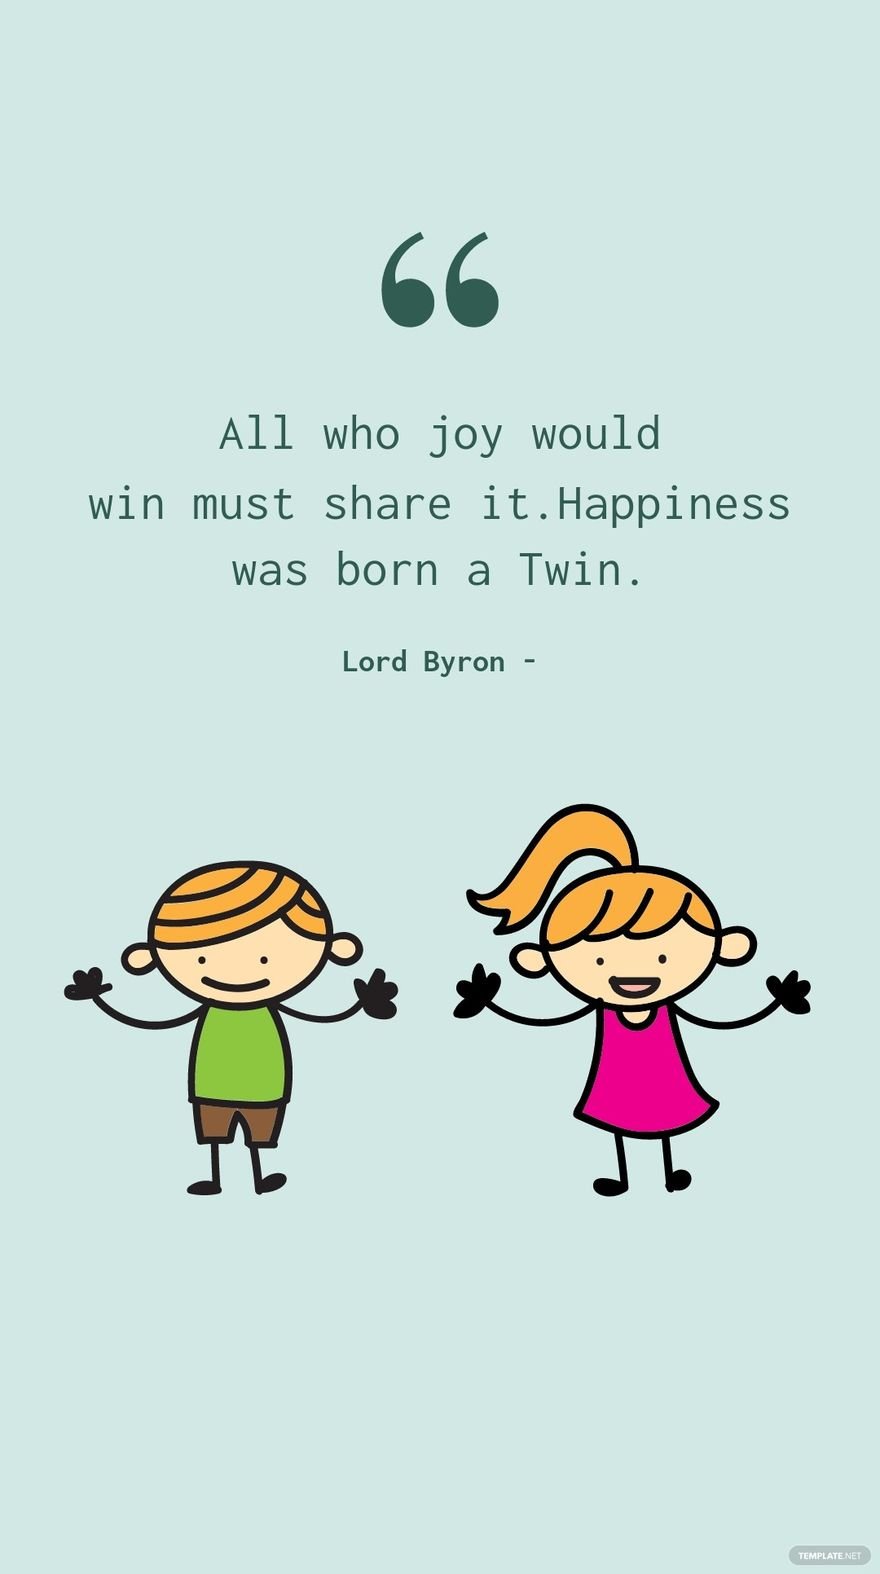 Lord Byron - All who joy would win must share it. Happiness was born a Twin.